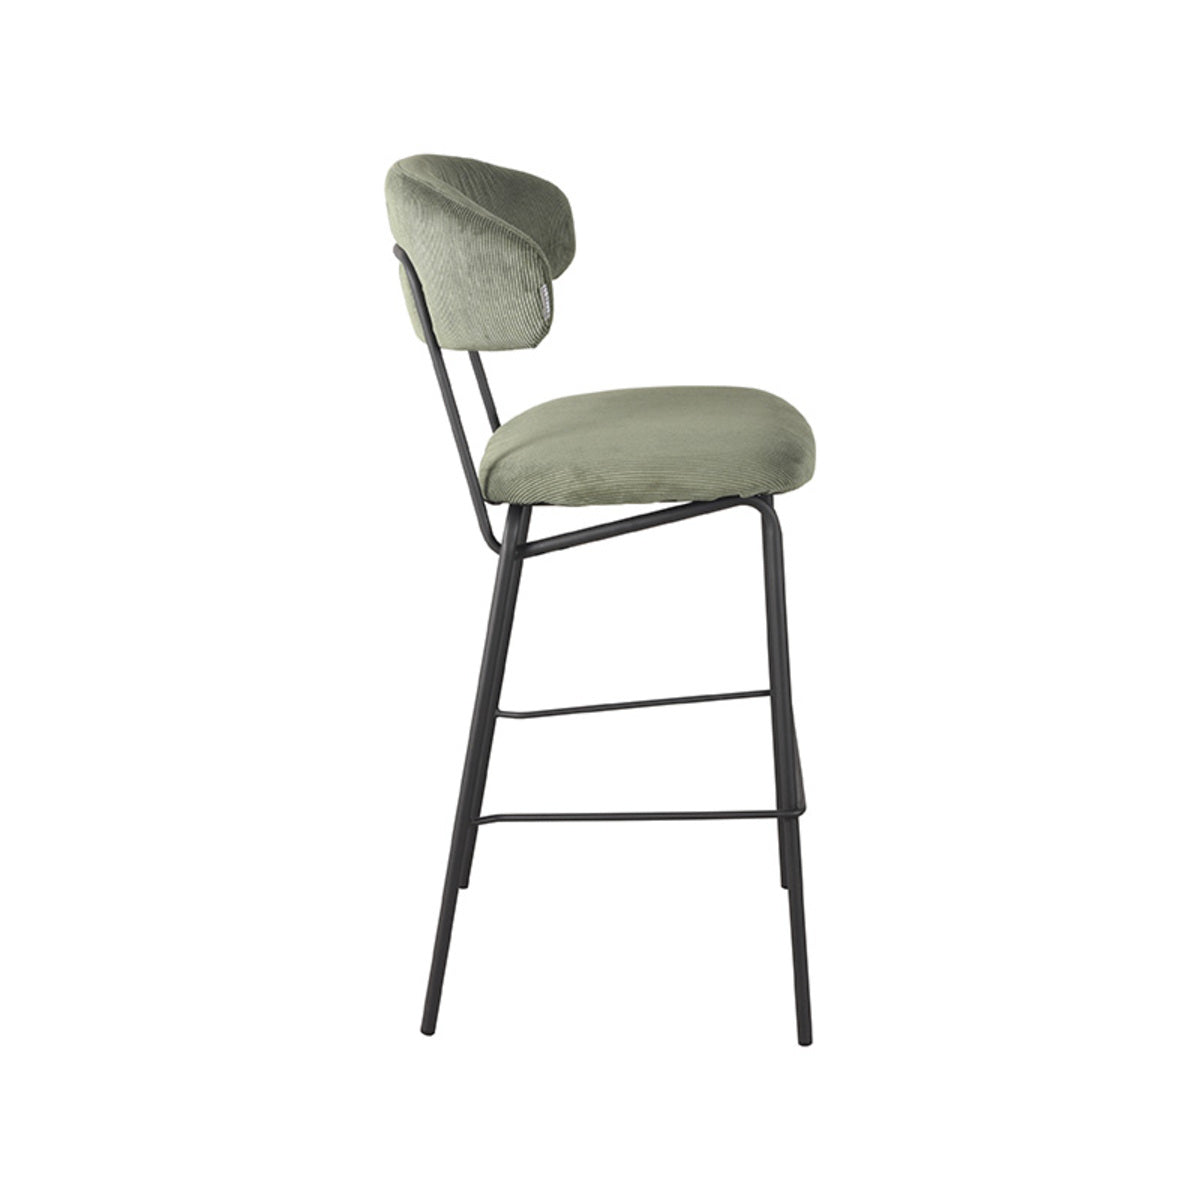 LABEL51 Bar stool Zack - Green - Ribcord - Seat height 78 | 2 pieces